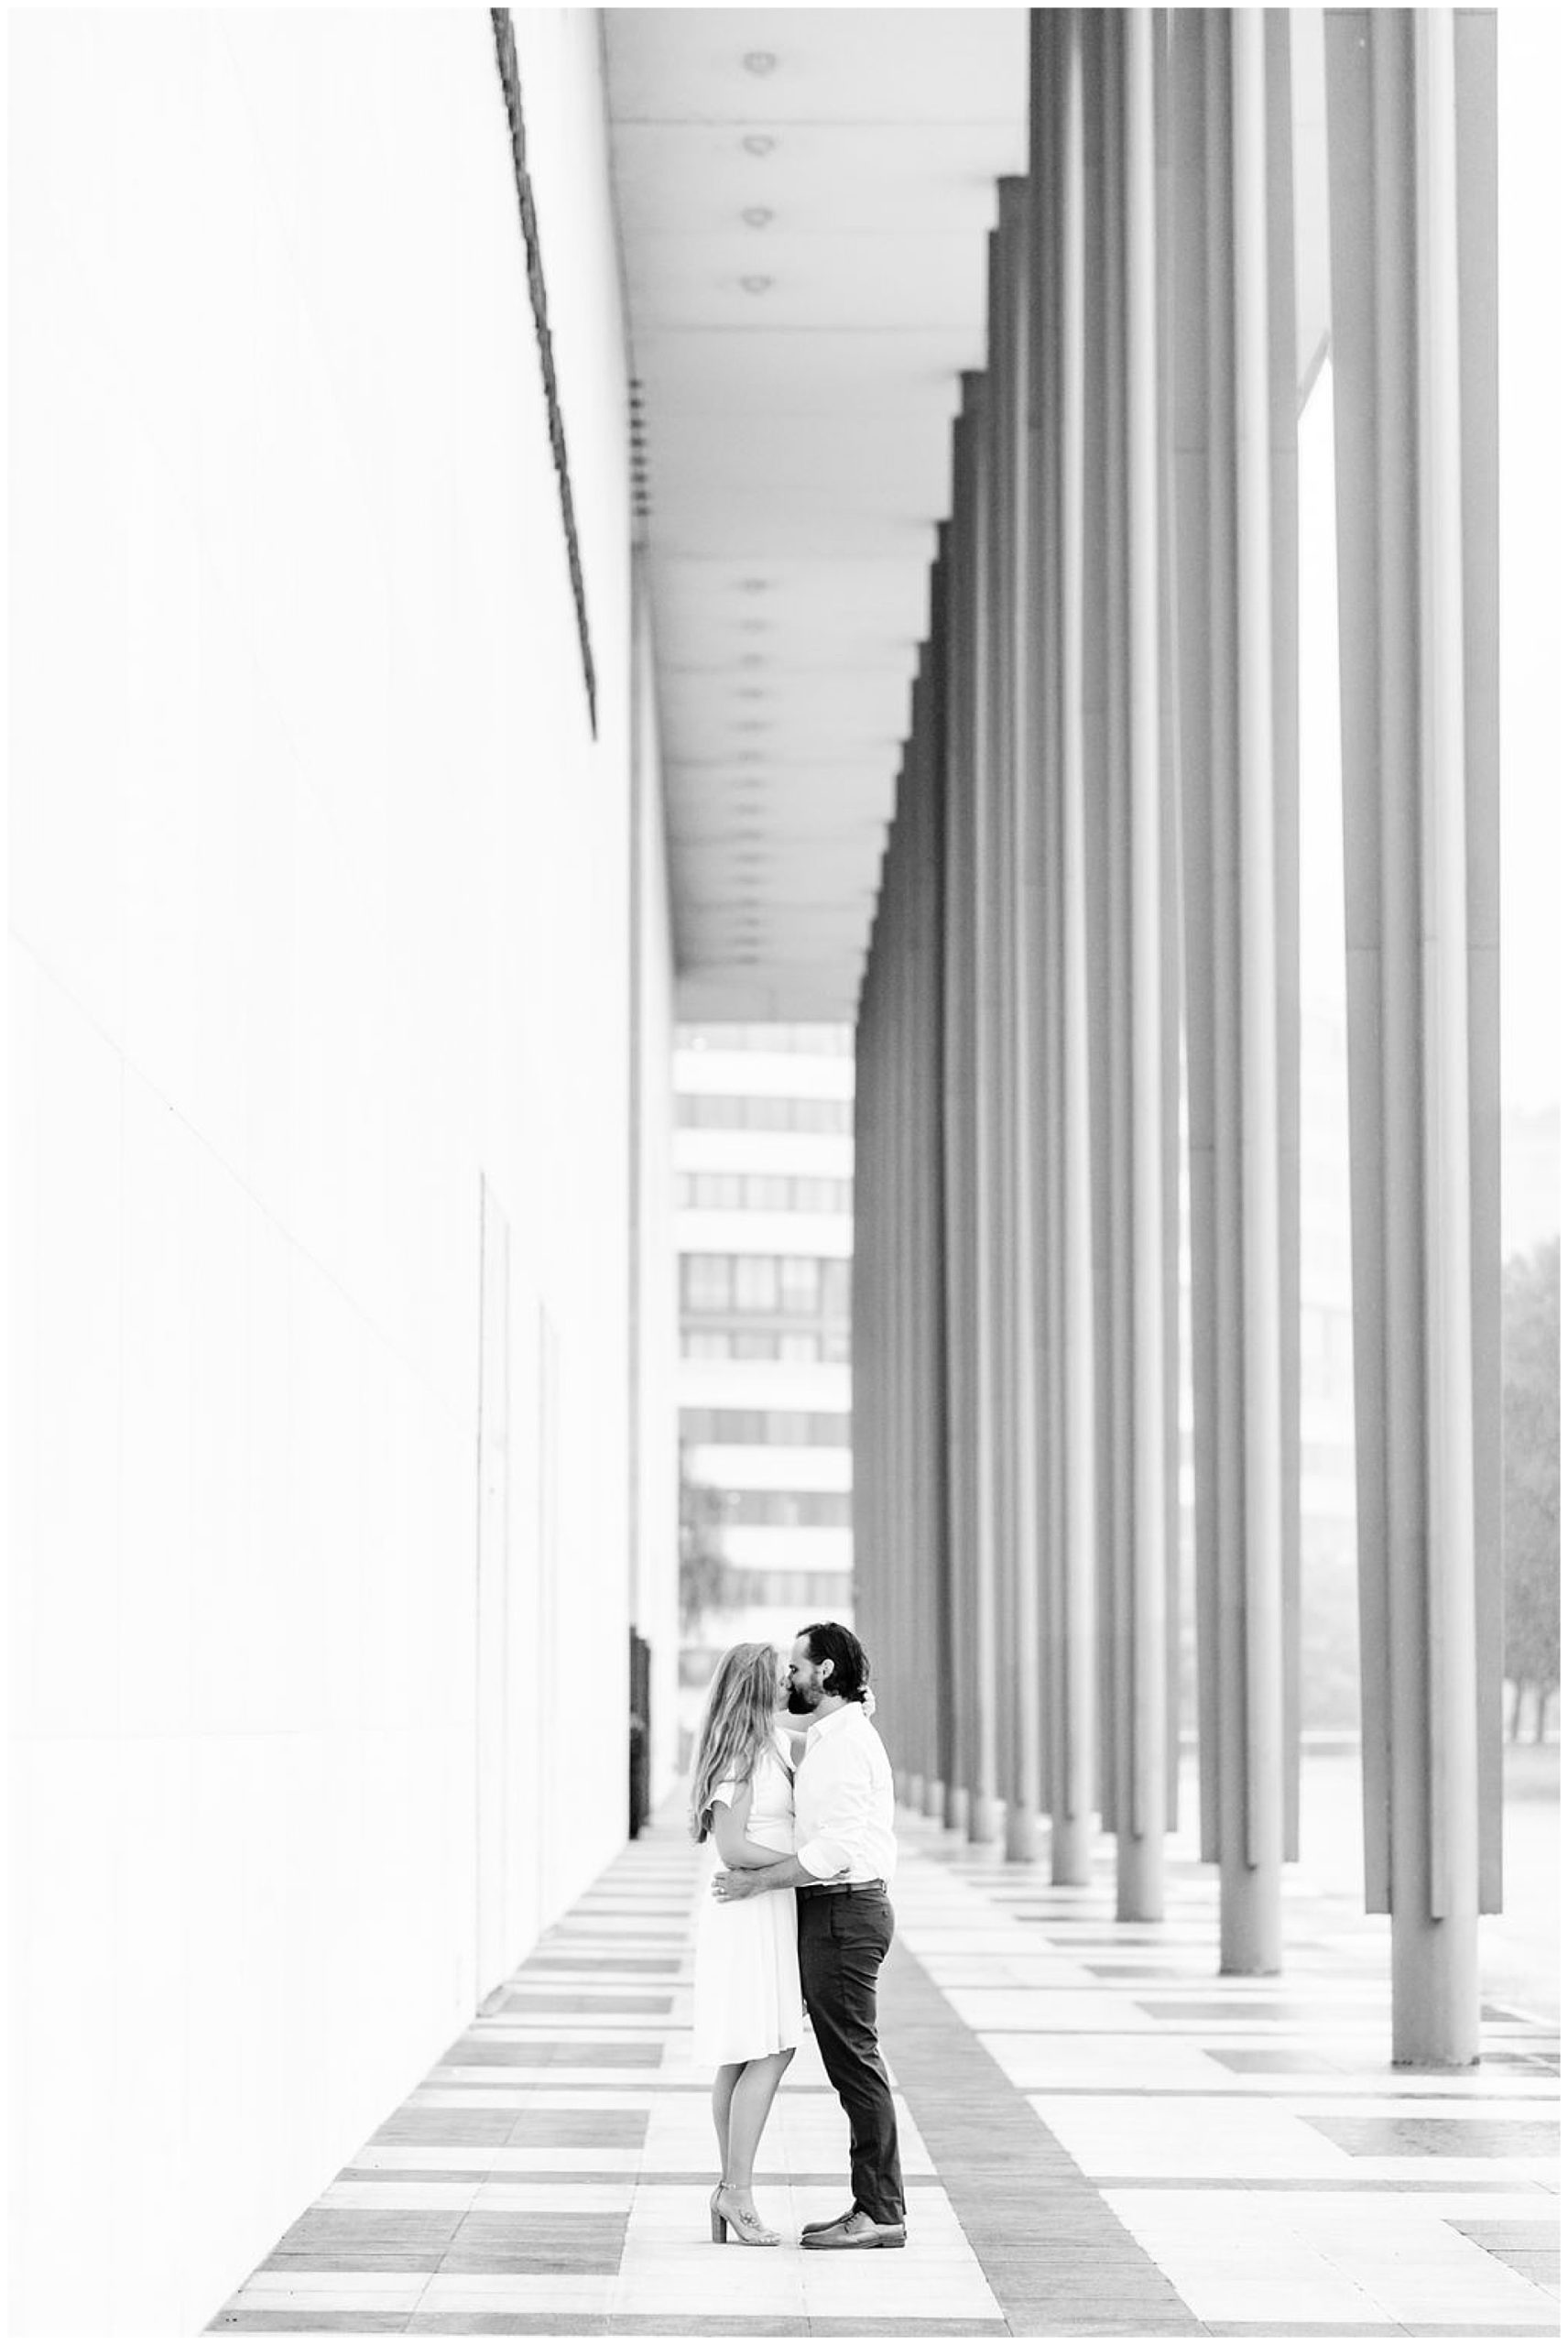 rainy Kennedy Center elopement, DC elopement, rainy day portraits, rainy elopement, rainy engagement photos, playing in the rain, Washington DC wedding photographer, DC wedding photography, playful portraits, boho couple, dancing in the rain, Rachel E.H. Photography, black and white, couple kissing